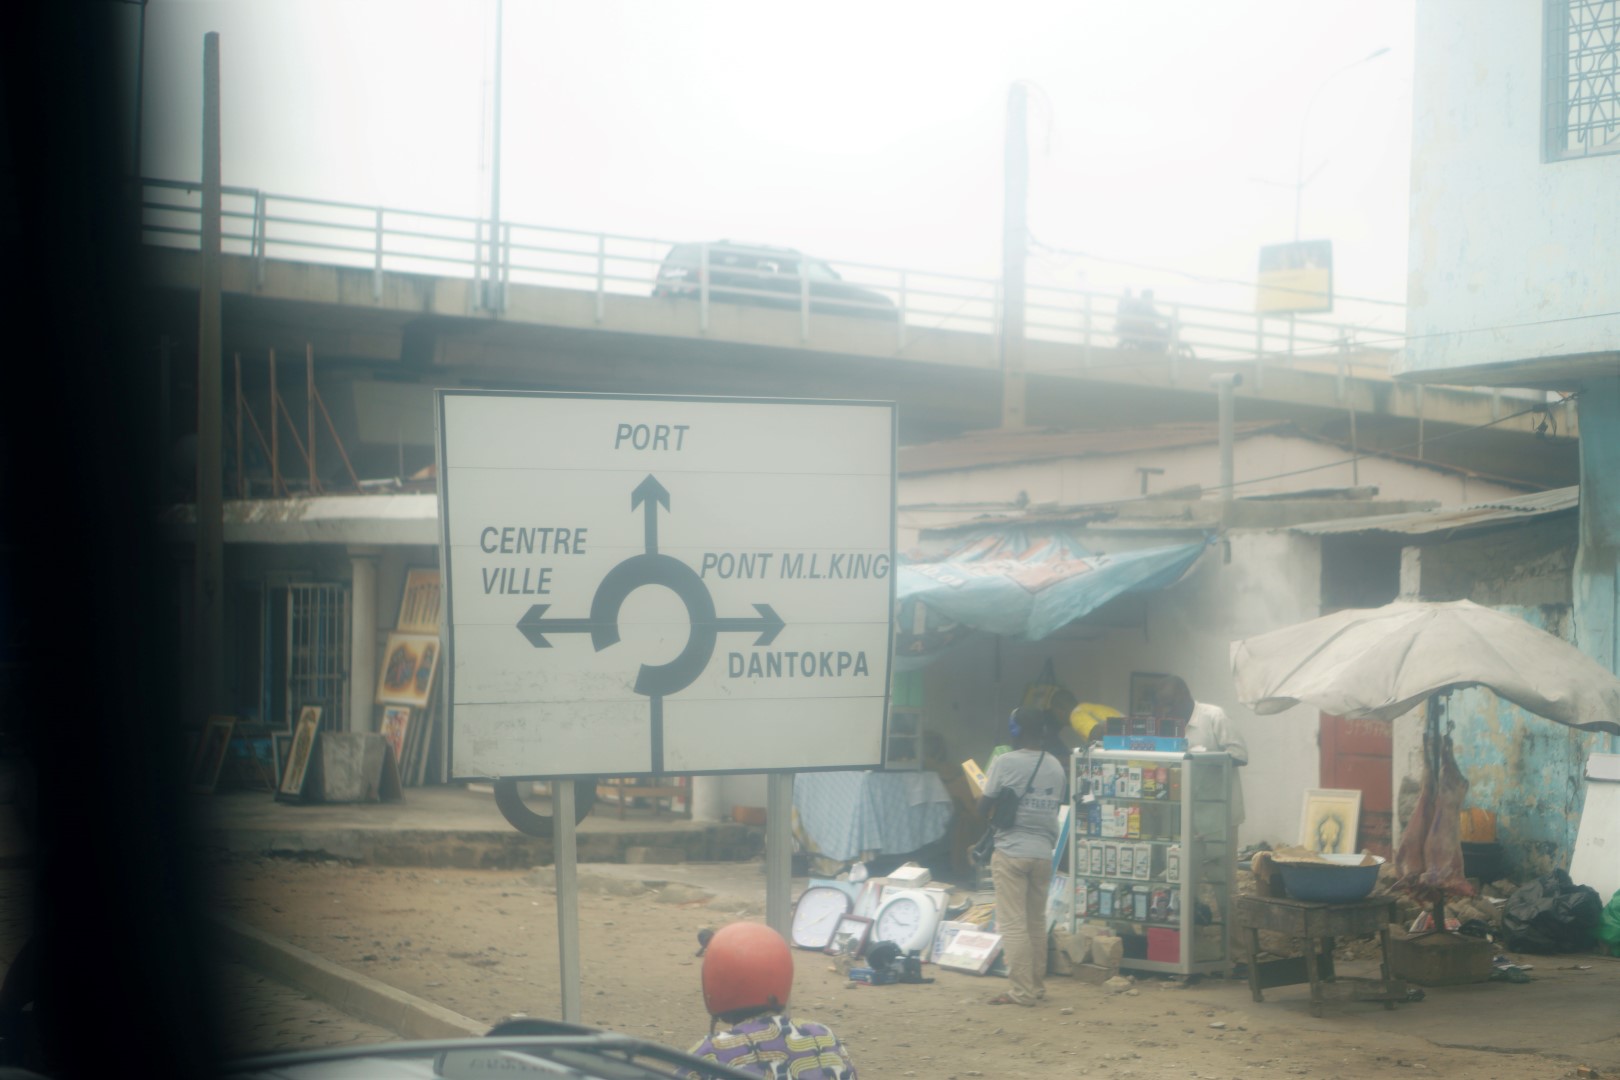 Sign post in togo